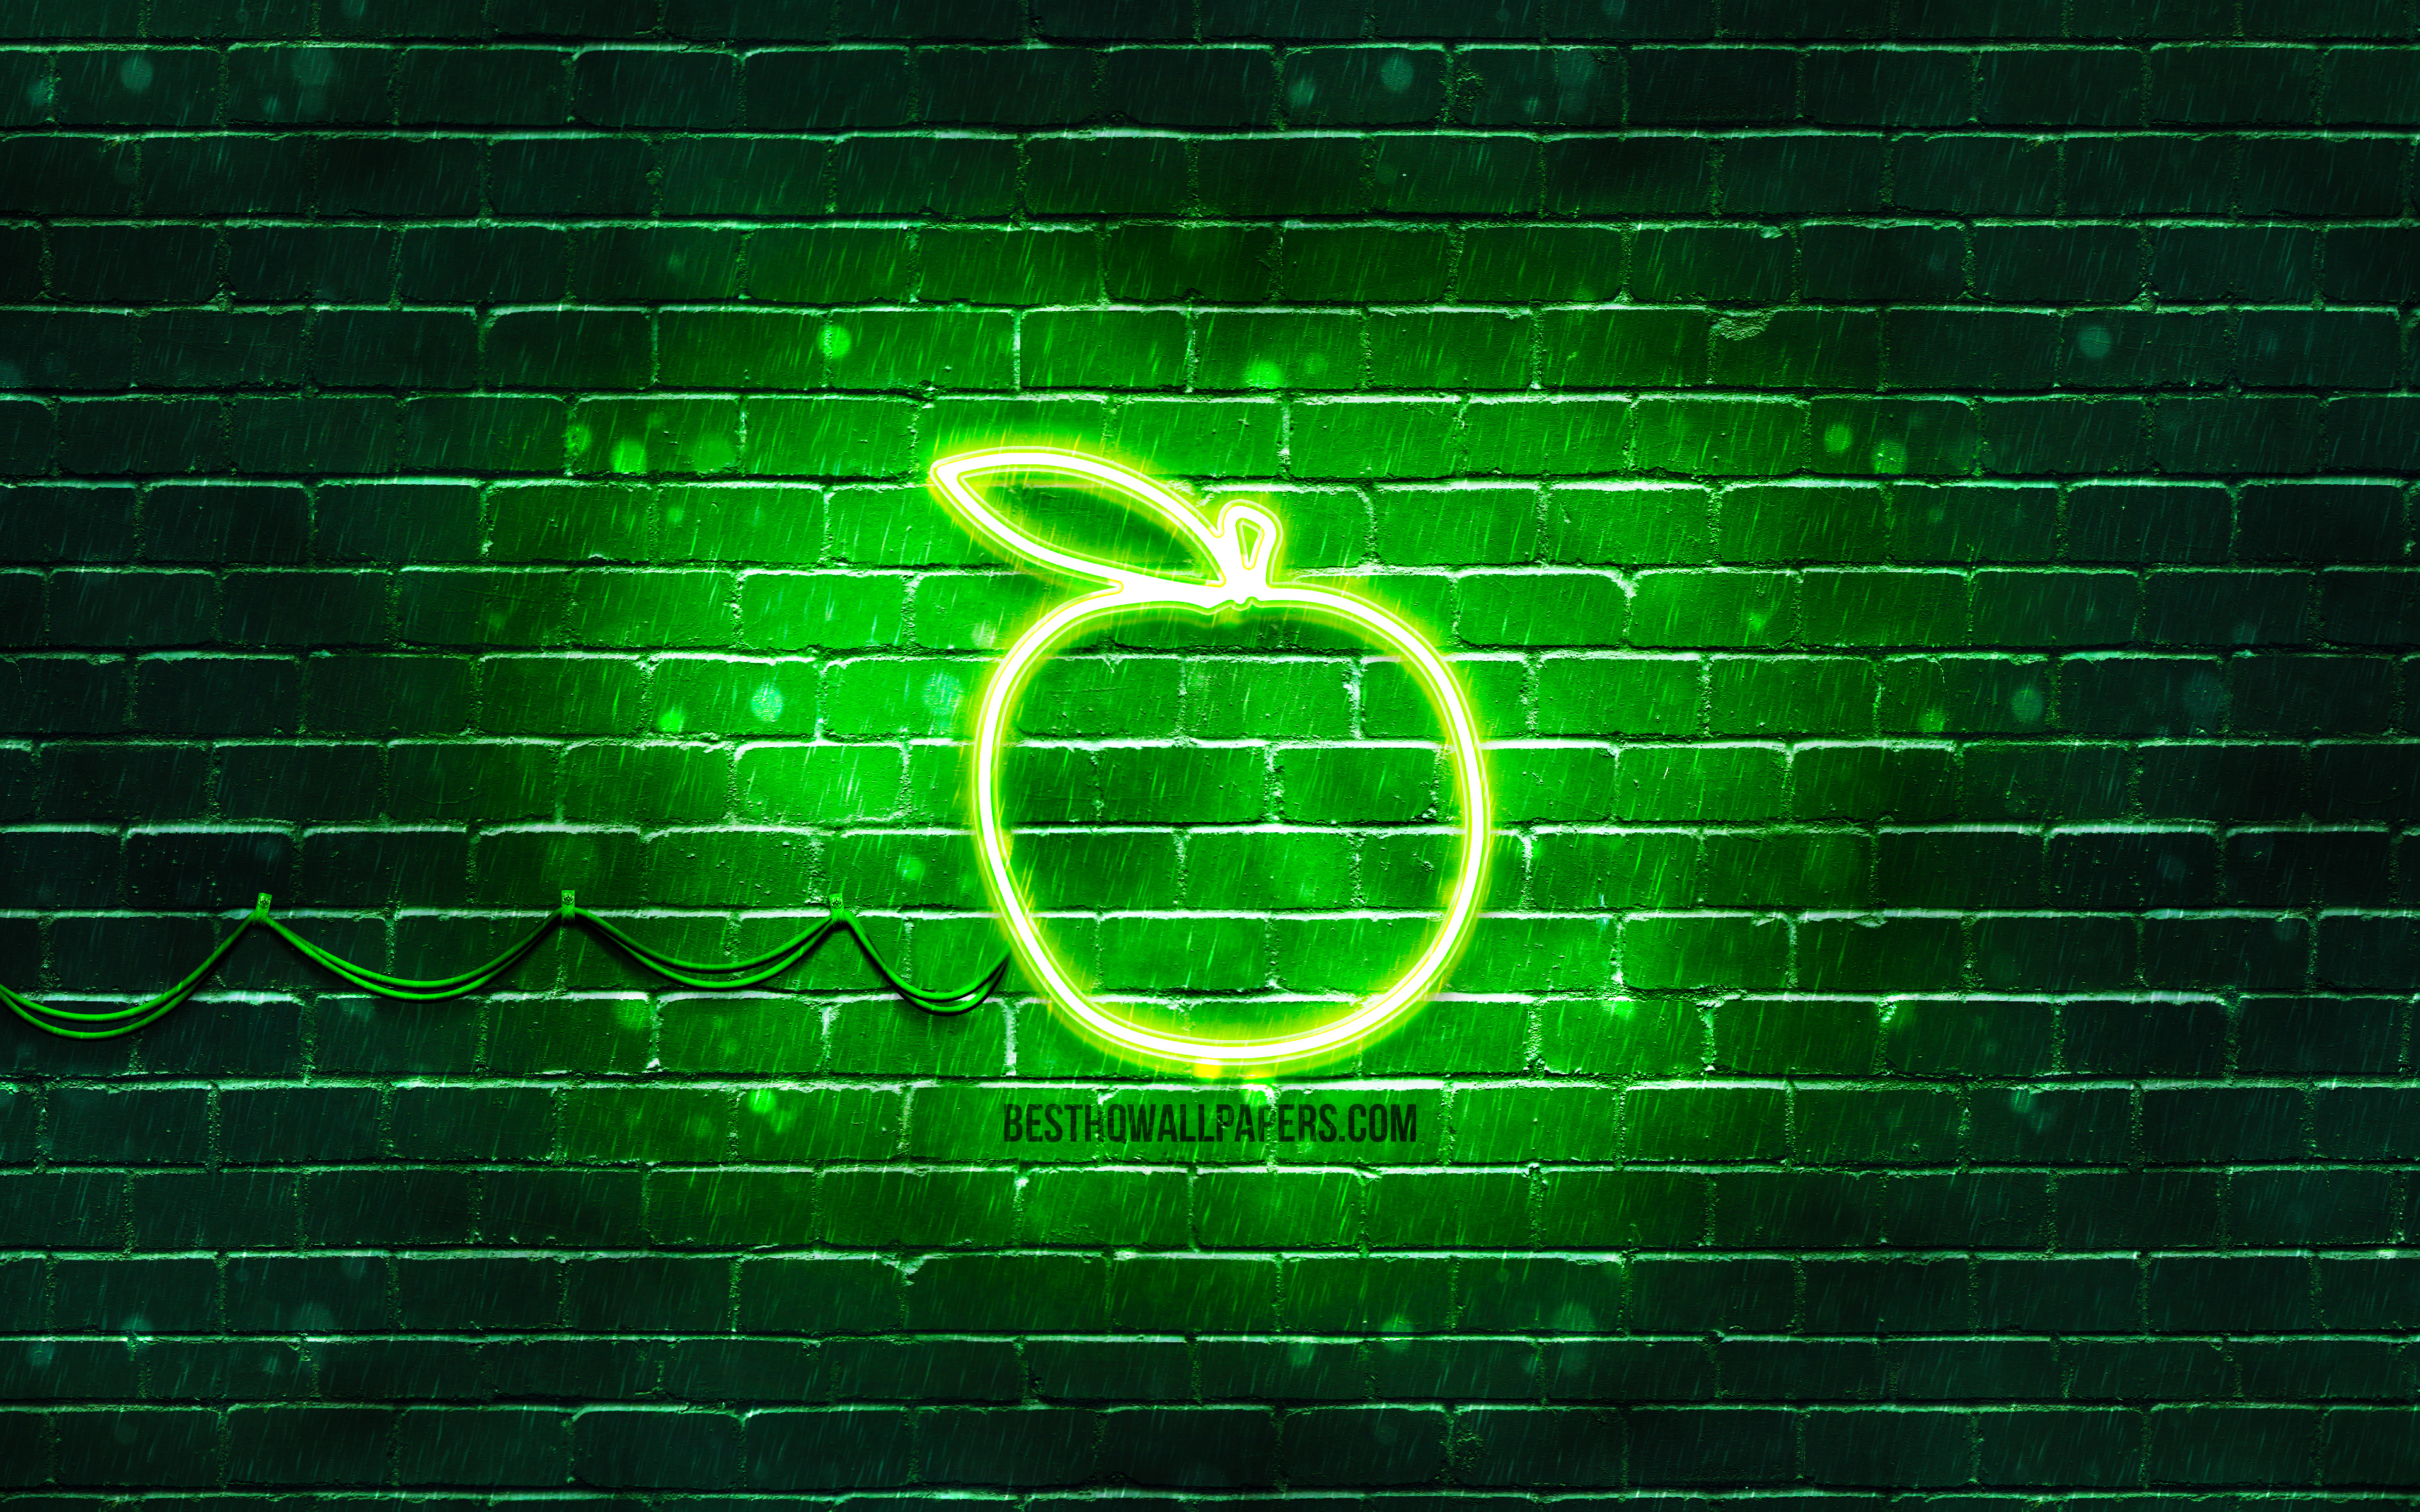 Download wallpapers Green Apple neon icon, 4k, green background, neon symbols, Green Apple, creative, neon icons, Apple sign, food signs, Apple icon, food icons for desktop with resolution 3840x2400. High Quality HD